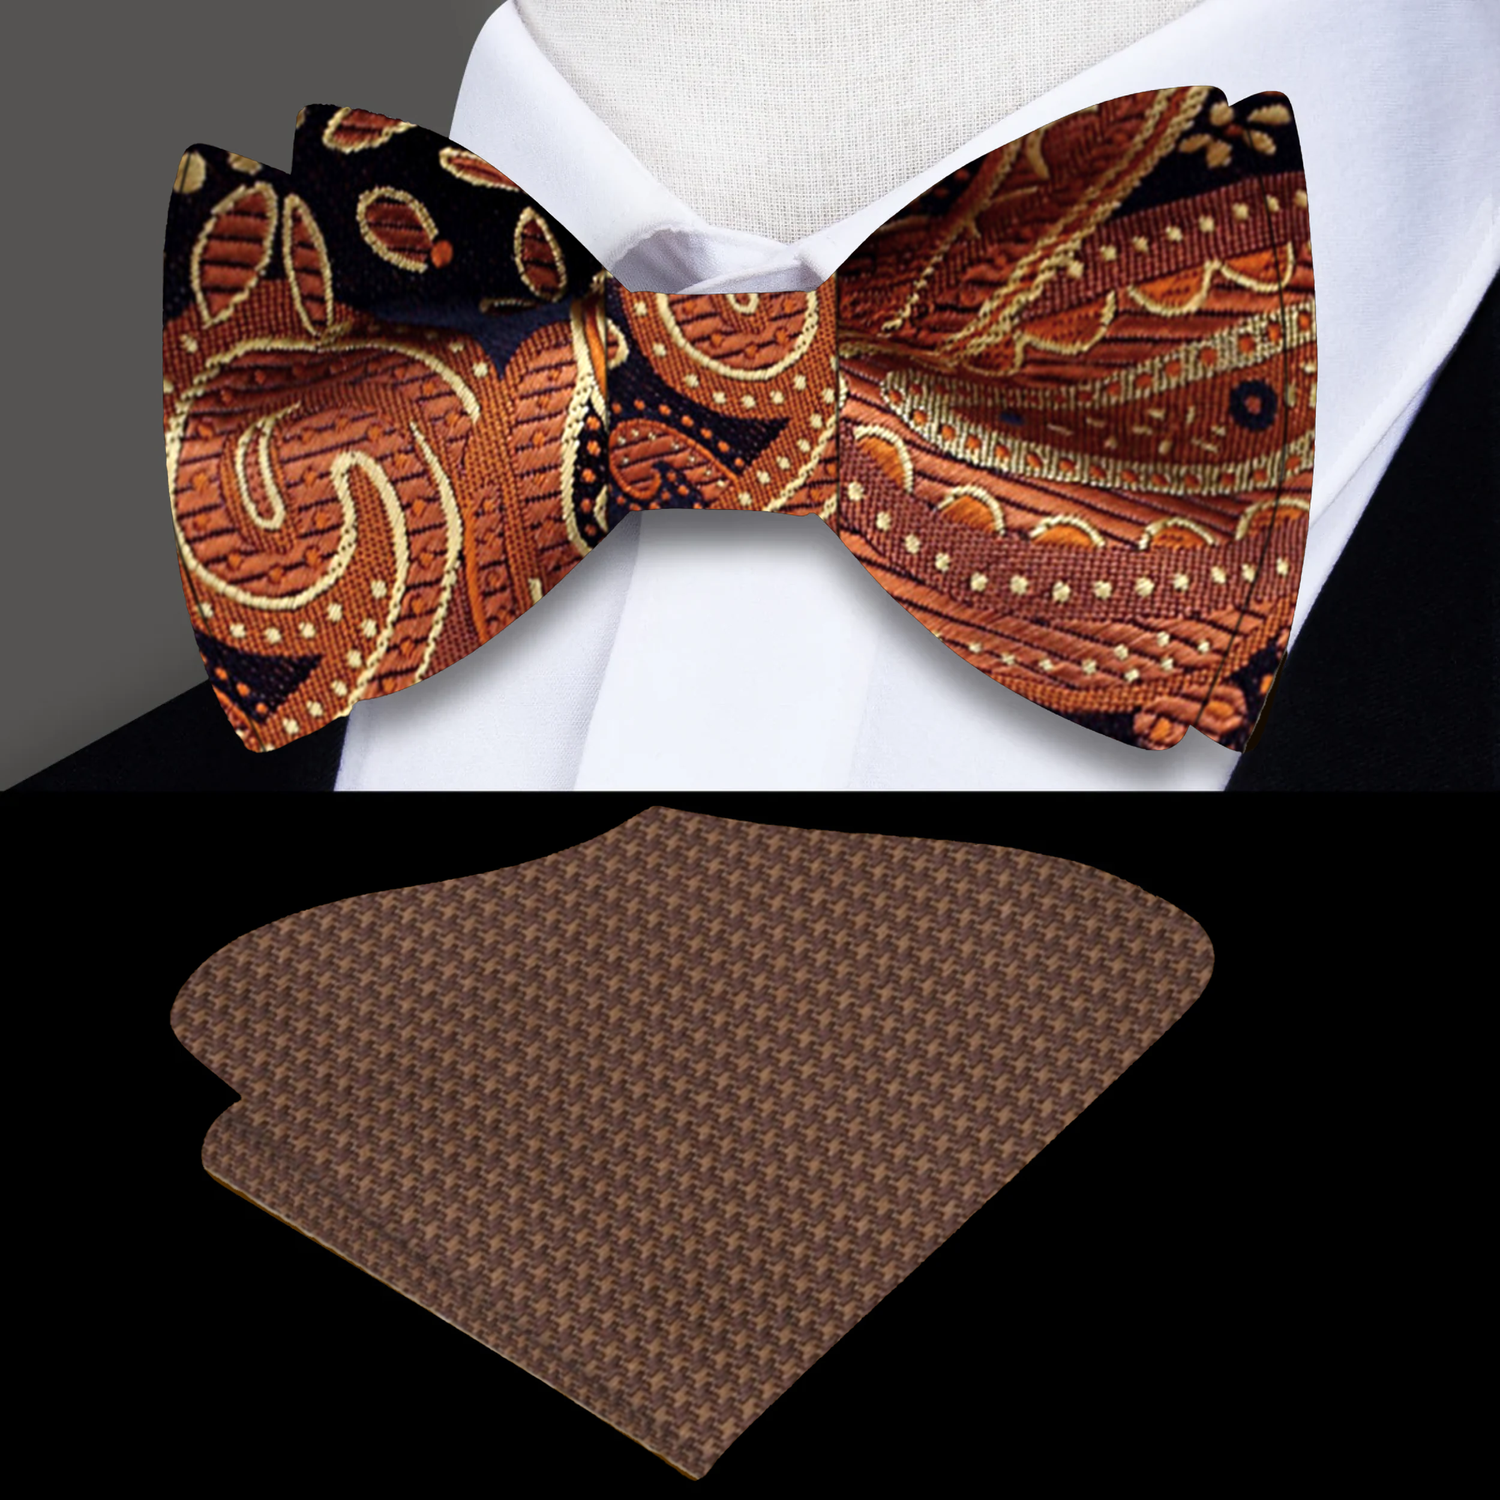 Main: Shades of Brown Paisley Bow Tie and Brown Square